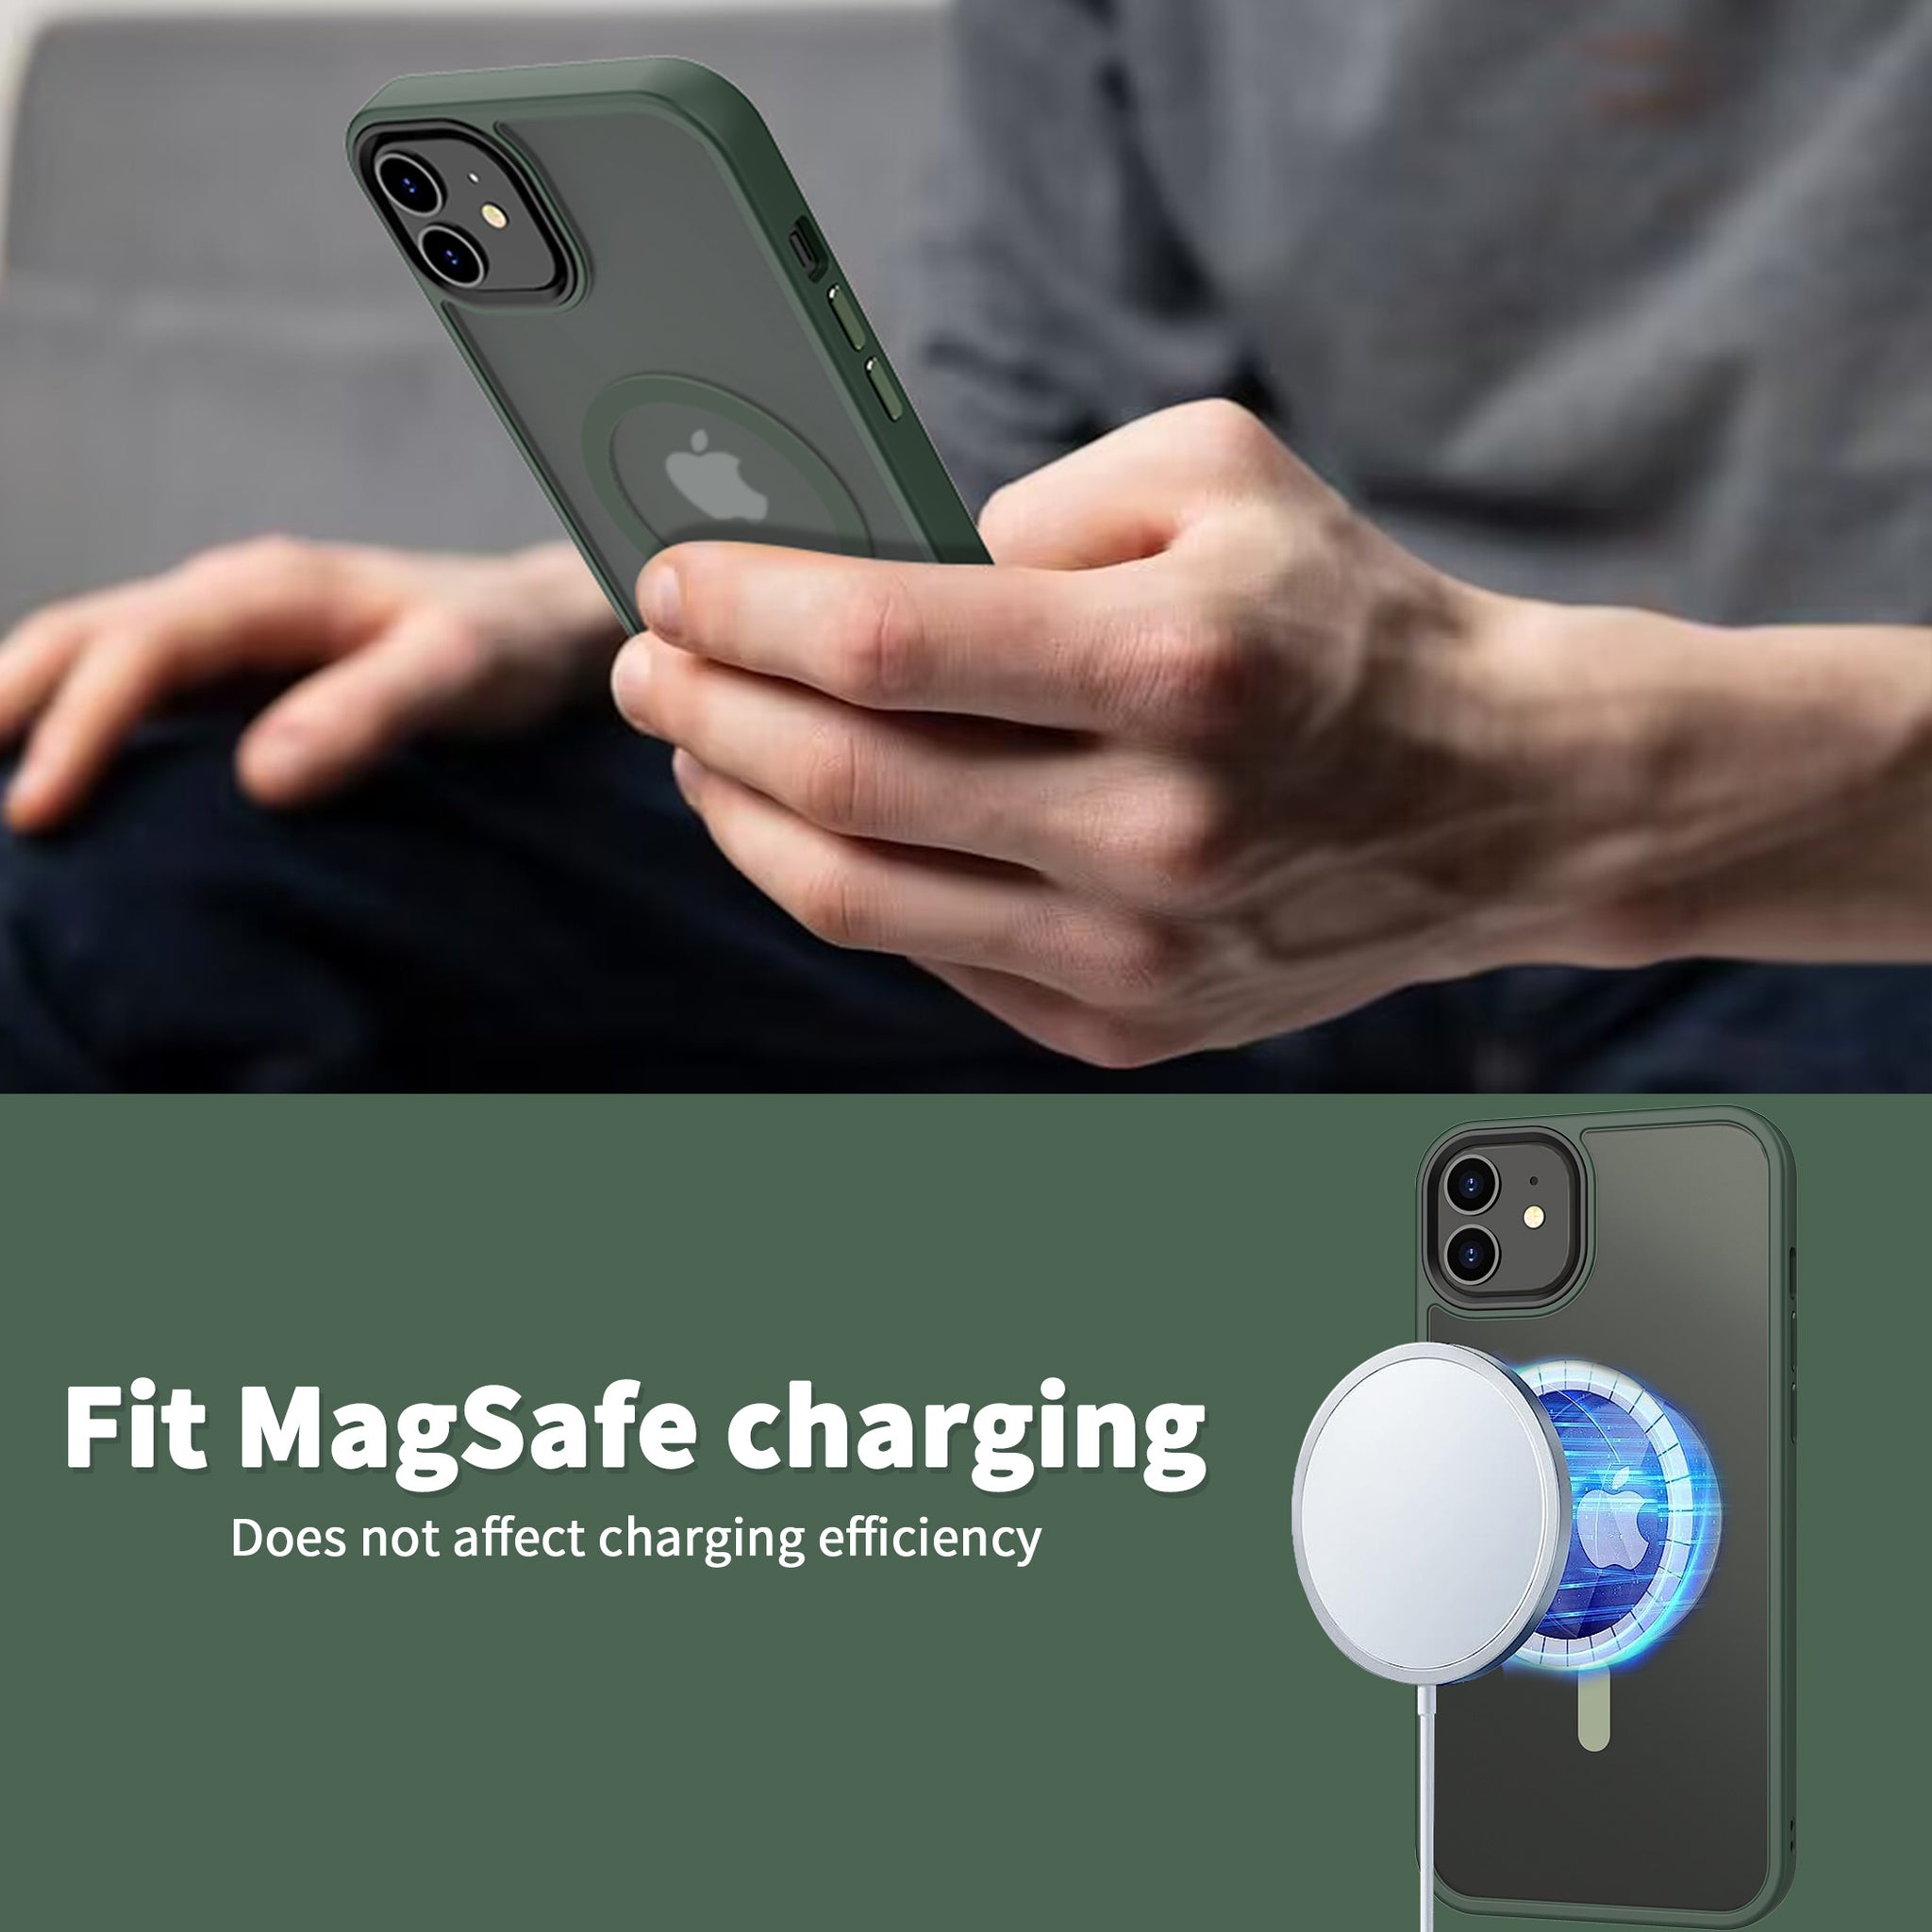 CACOE Magnetic Case for iPhone 12 & iPhone 12 Pro 2020 6.1 inch-Compatible with MagSafe & Magnetic Car Phone Mount,Anti-Fingerprint TPU Thin Phone Cases Cover Protective Shockproof (Dark Green)